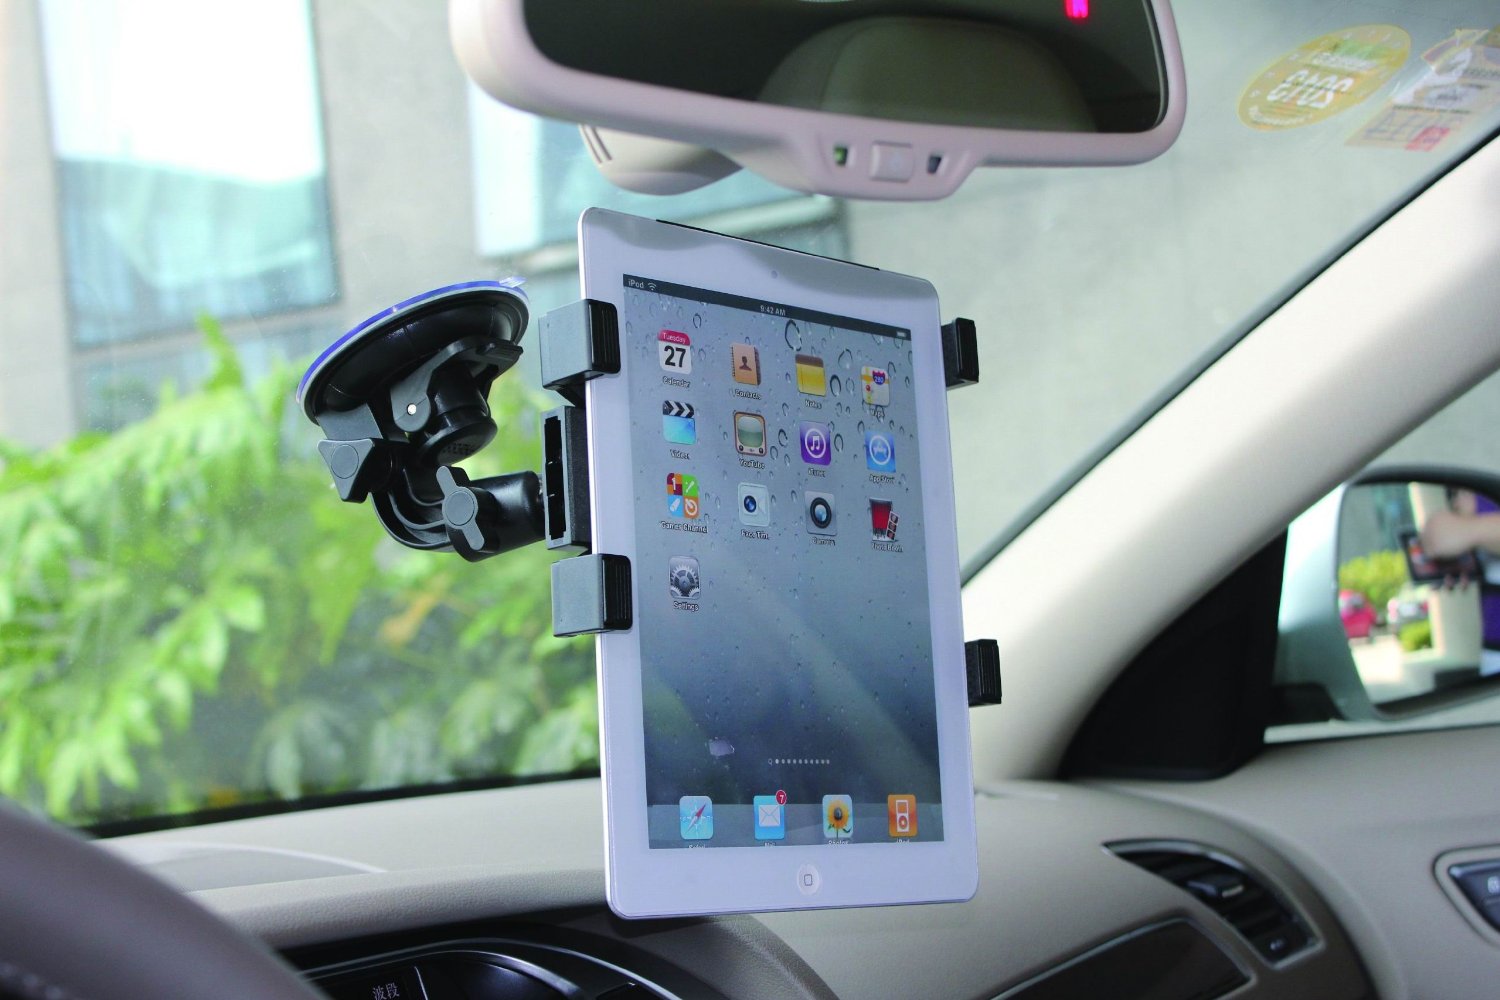 IBRA Windscreen In Car Suction Mount Holder with FULL 360 Degrees Rotation For Apple ipad 1/Ipad 2/ and iPad 3/4,Samsung Galaxy Tab 7.0 8.0 10.1 3 / Kindle Fire HDX 7 8.9 / Google Nexus 7 FHD 7 and many other models